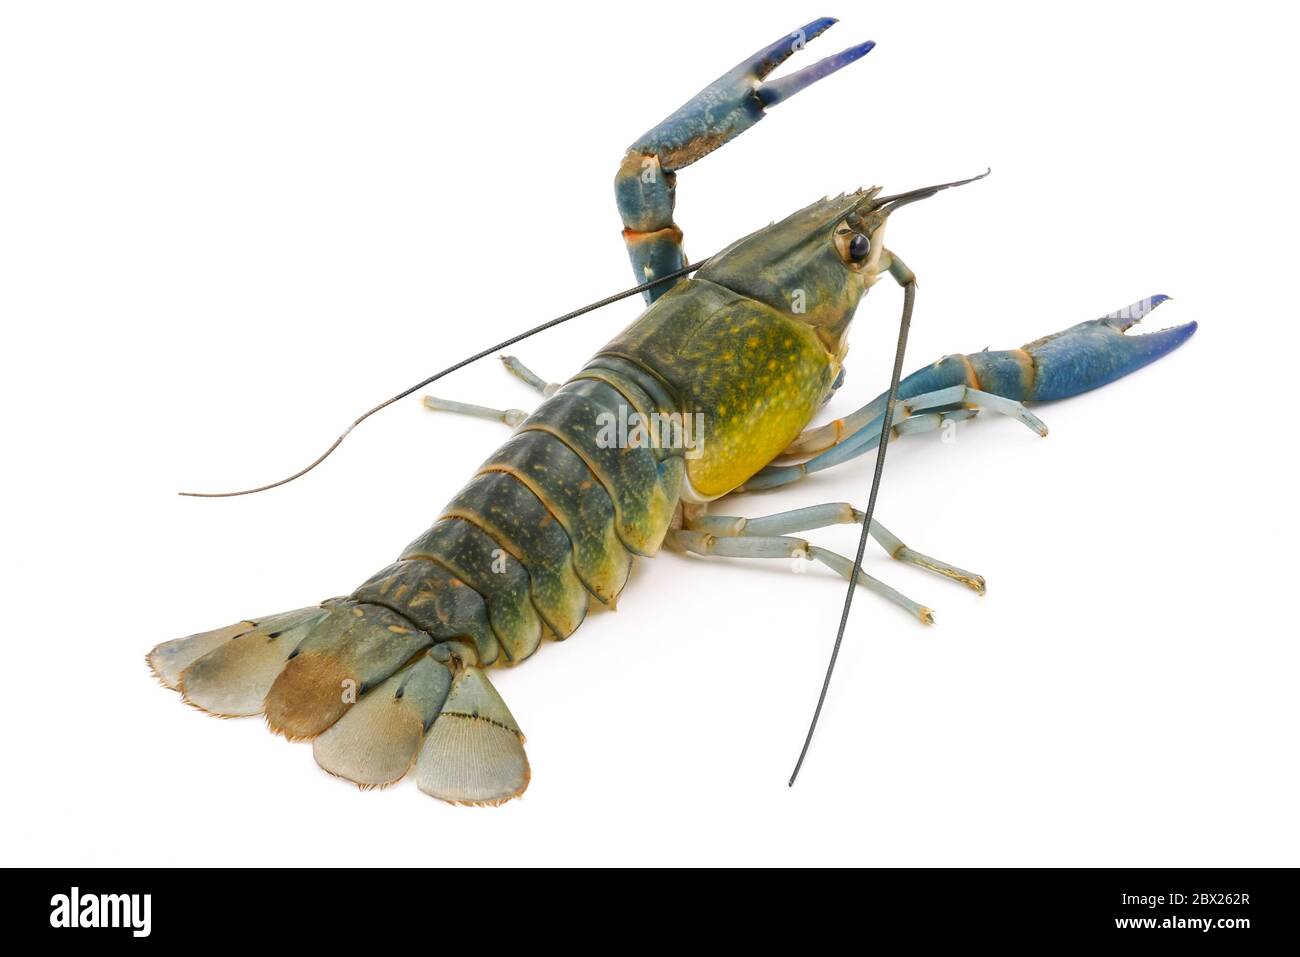 Crayfish or Freshwater lobster on a white background. Stock Photo